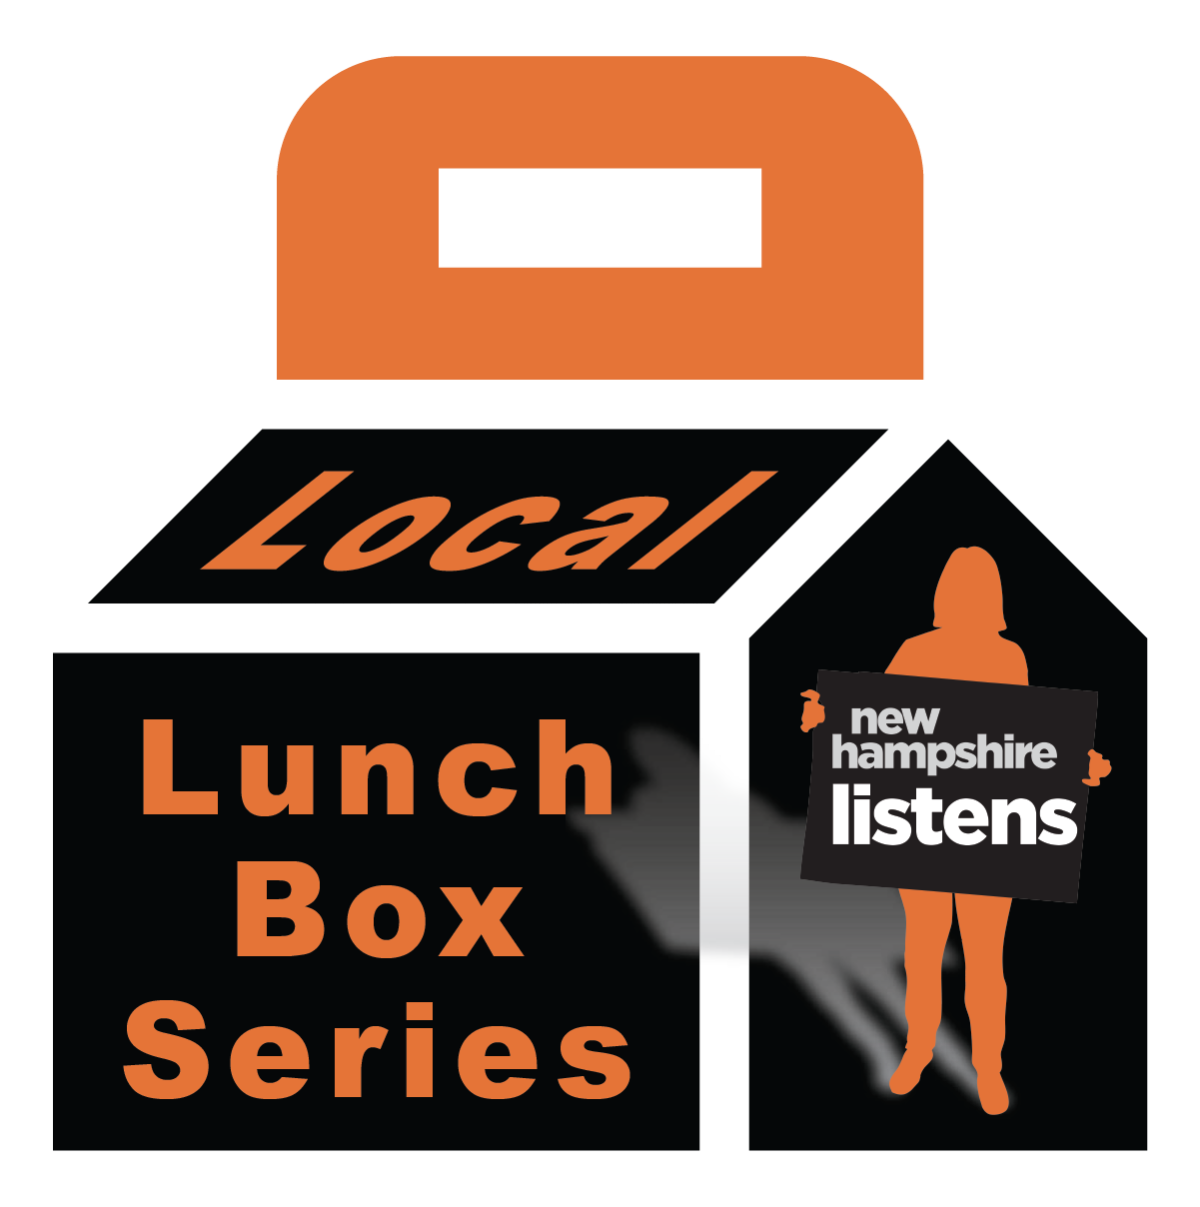 lunch box with text "lunch box series" and NH Listens logo